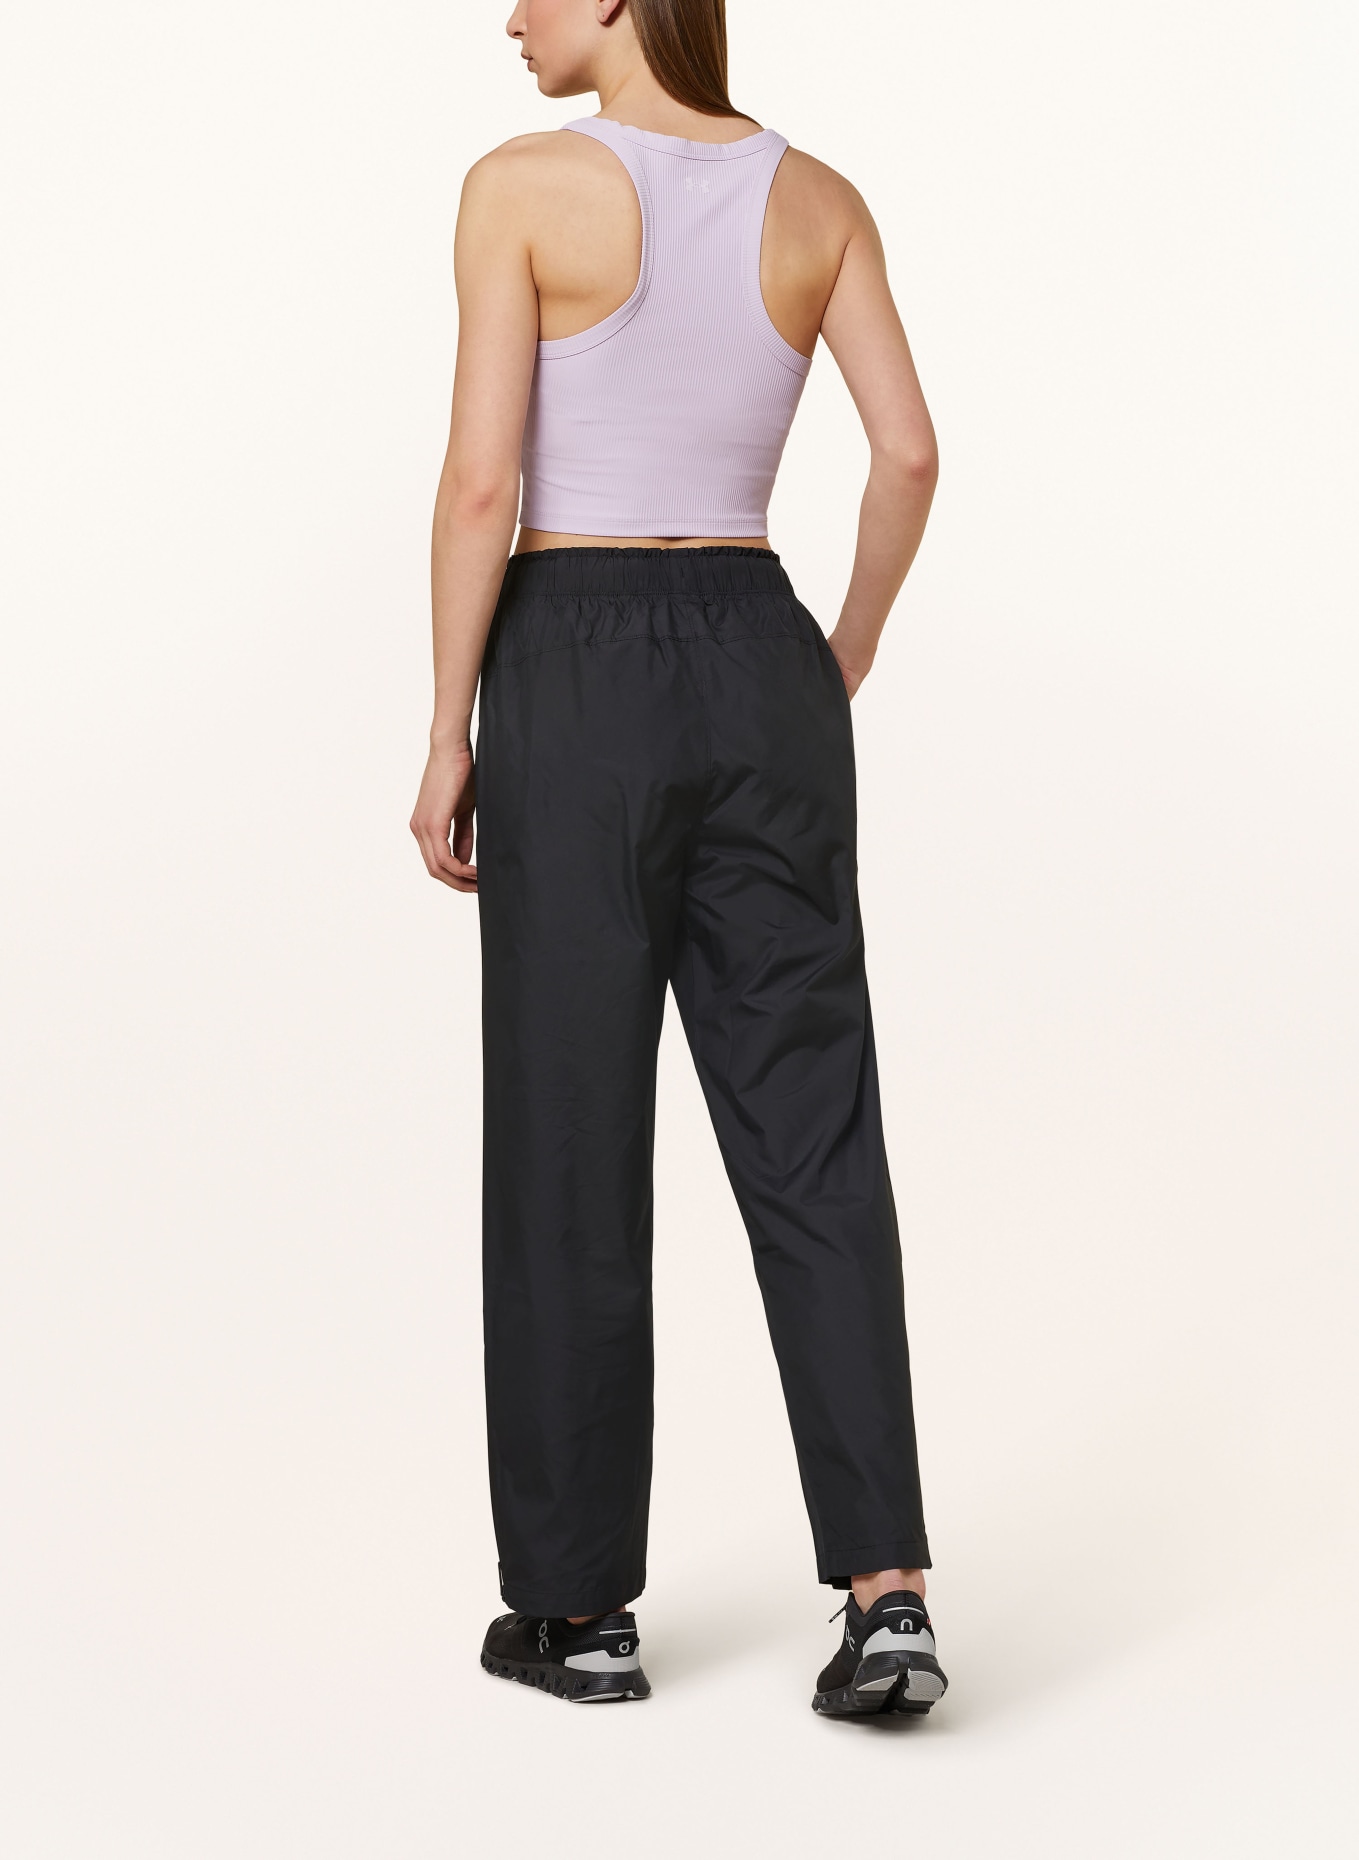 UNDER ARMOUR Cropped-Top MERIDIAN, Farbe: HELLLILA (Bild 3)